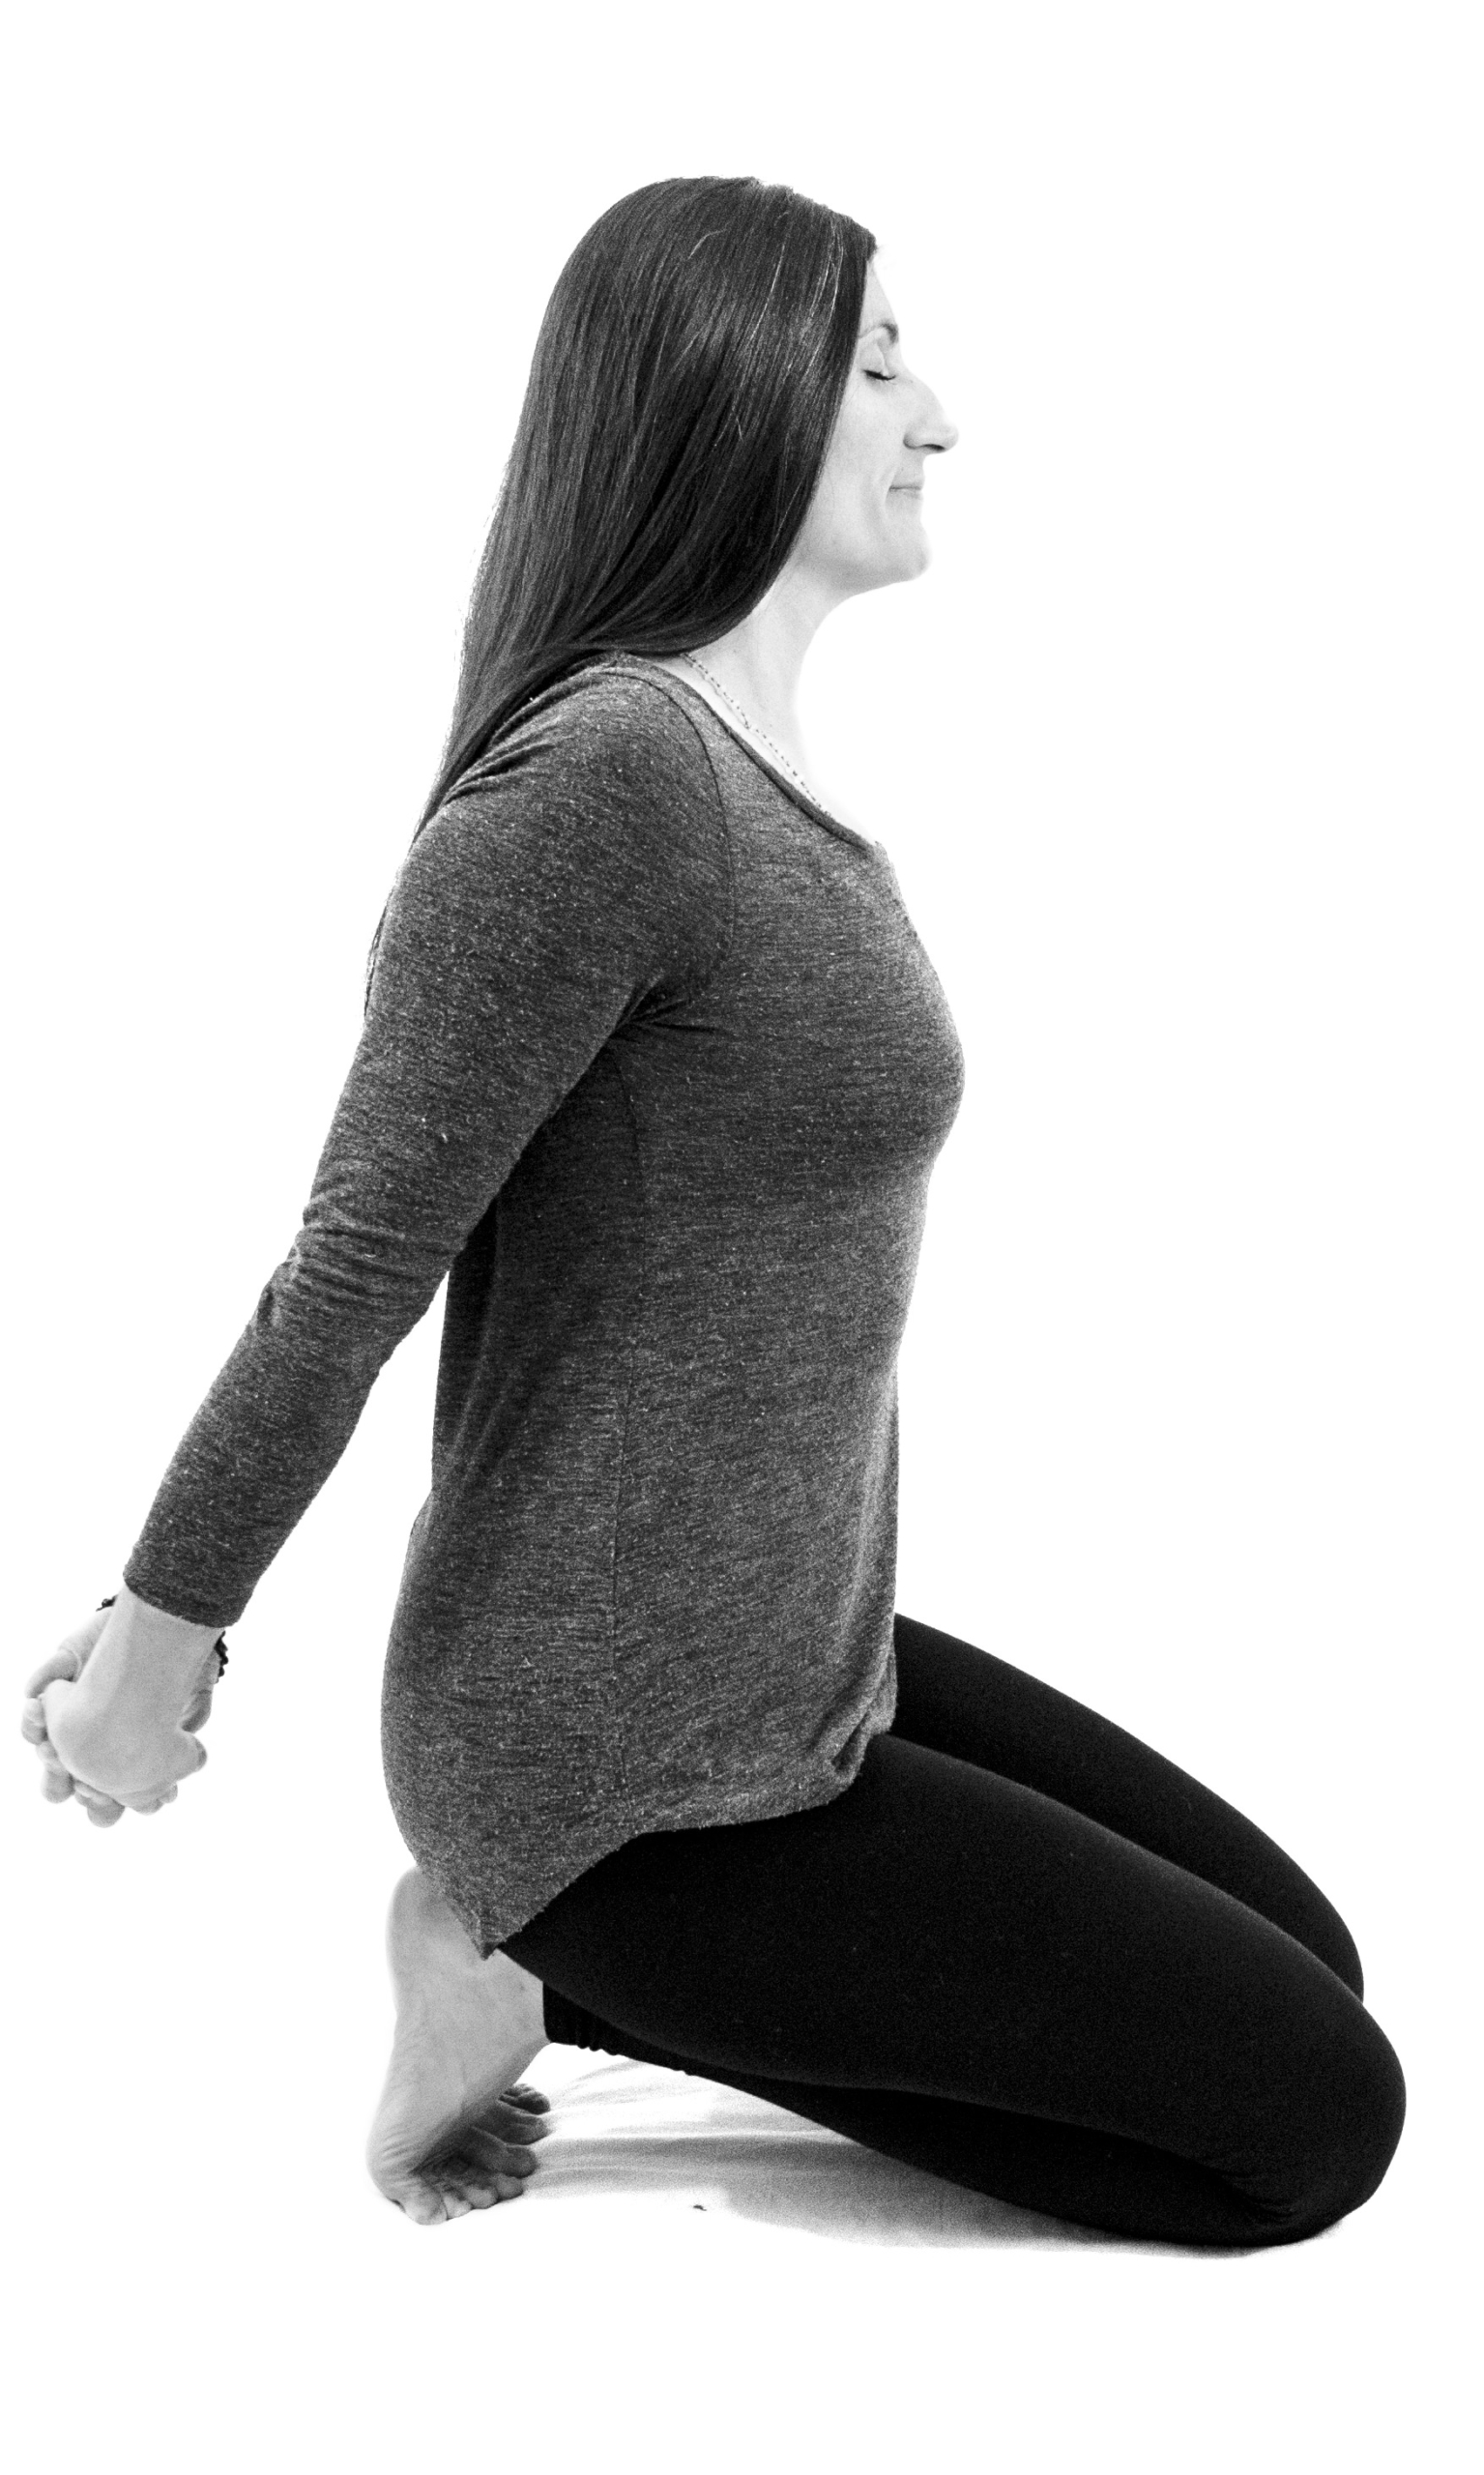 Interlace Chest and Shoulder Stretch, fingers interlaced with arms lengthened away from buttocks, toes tucked under